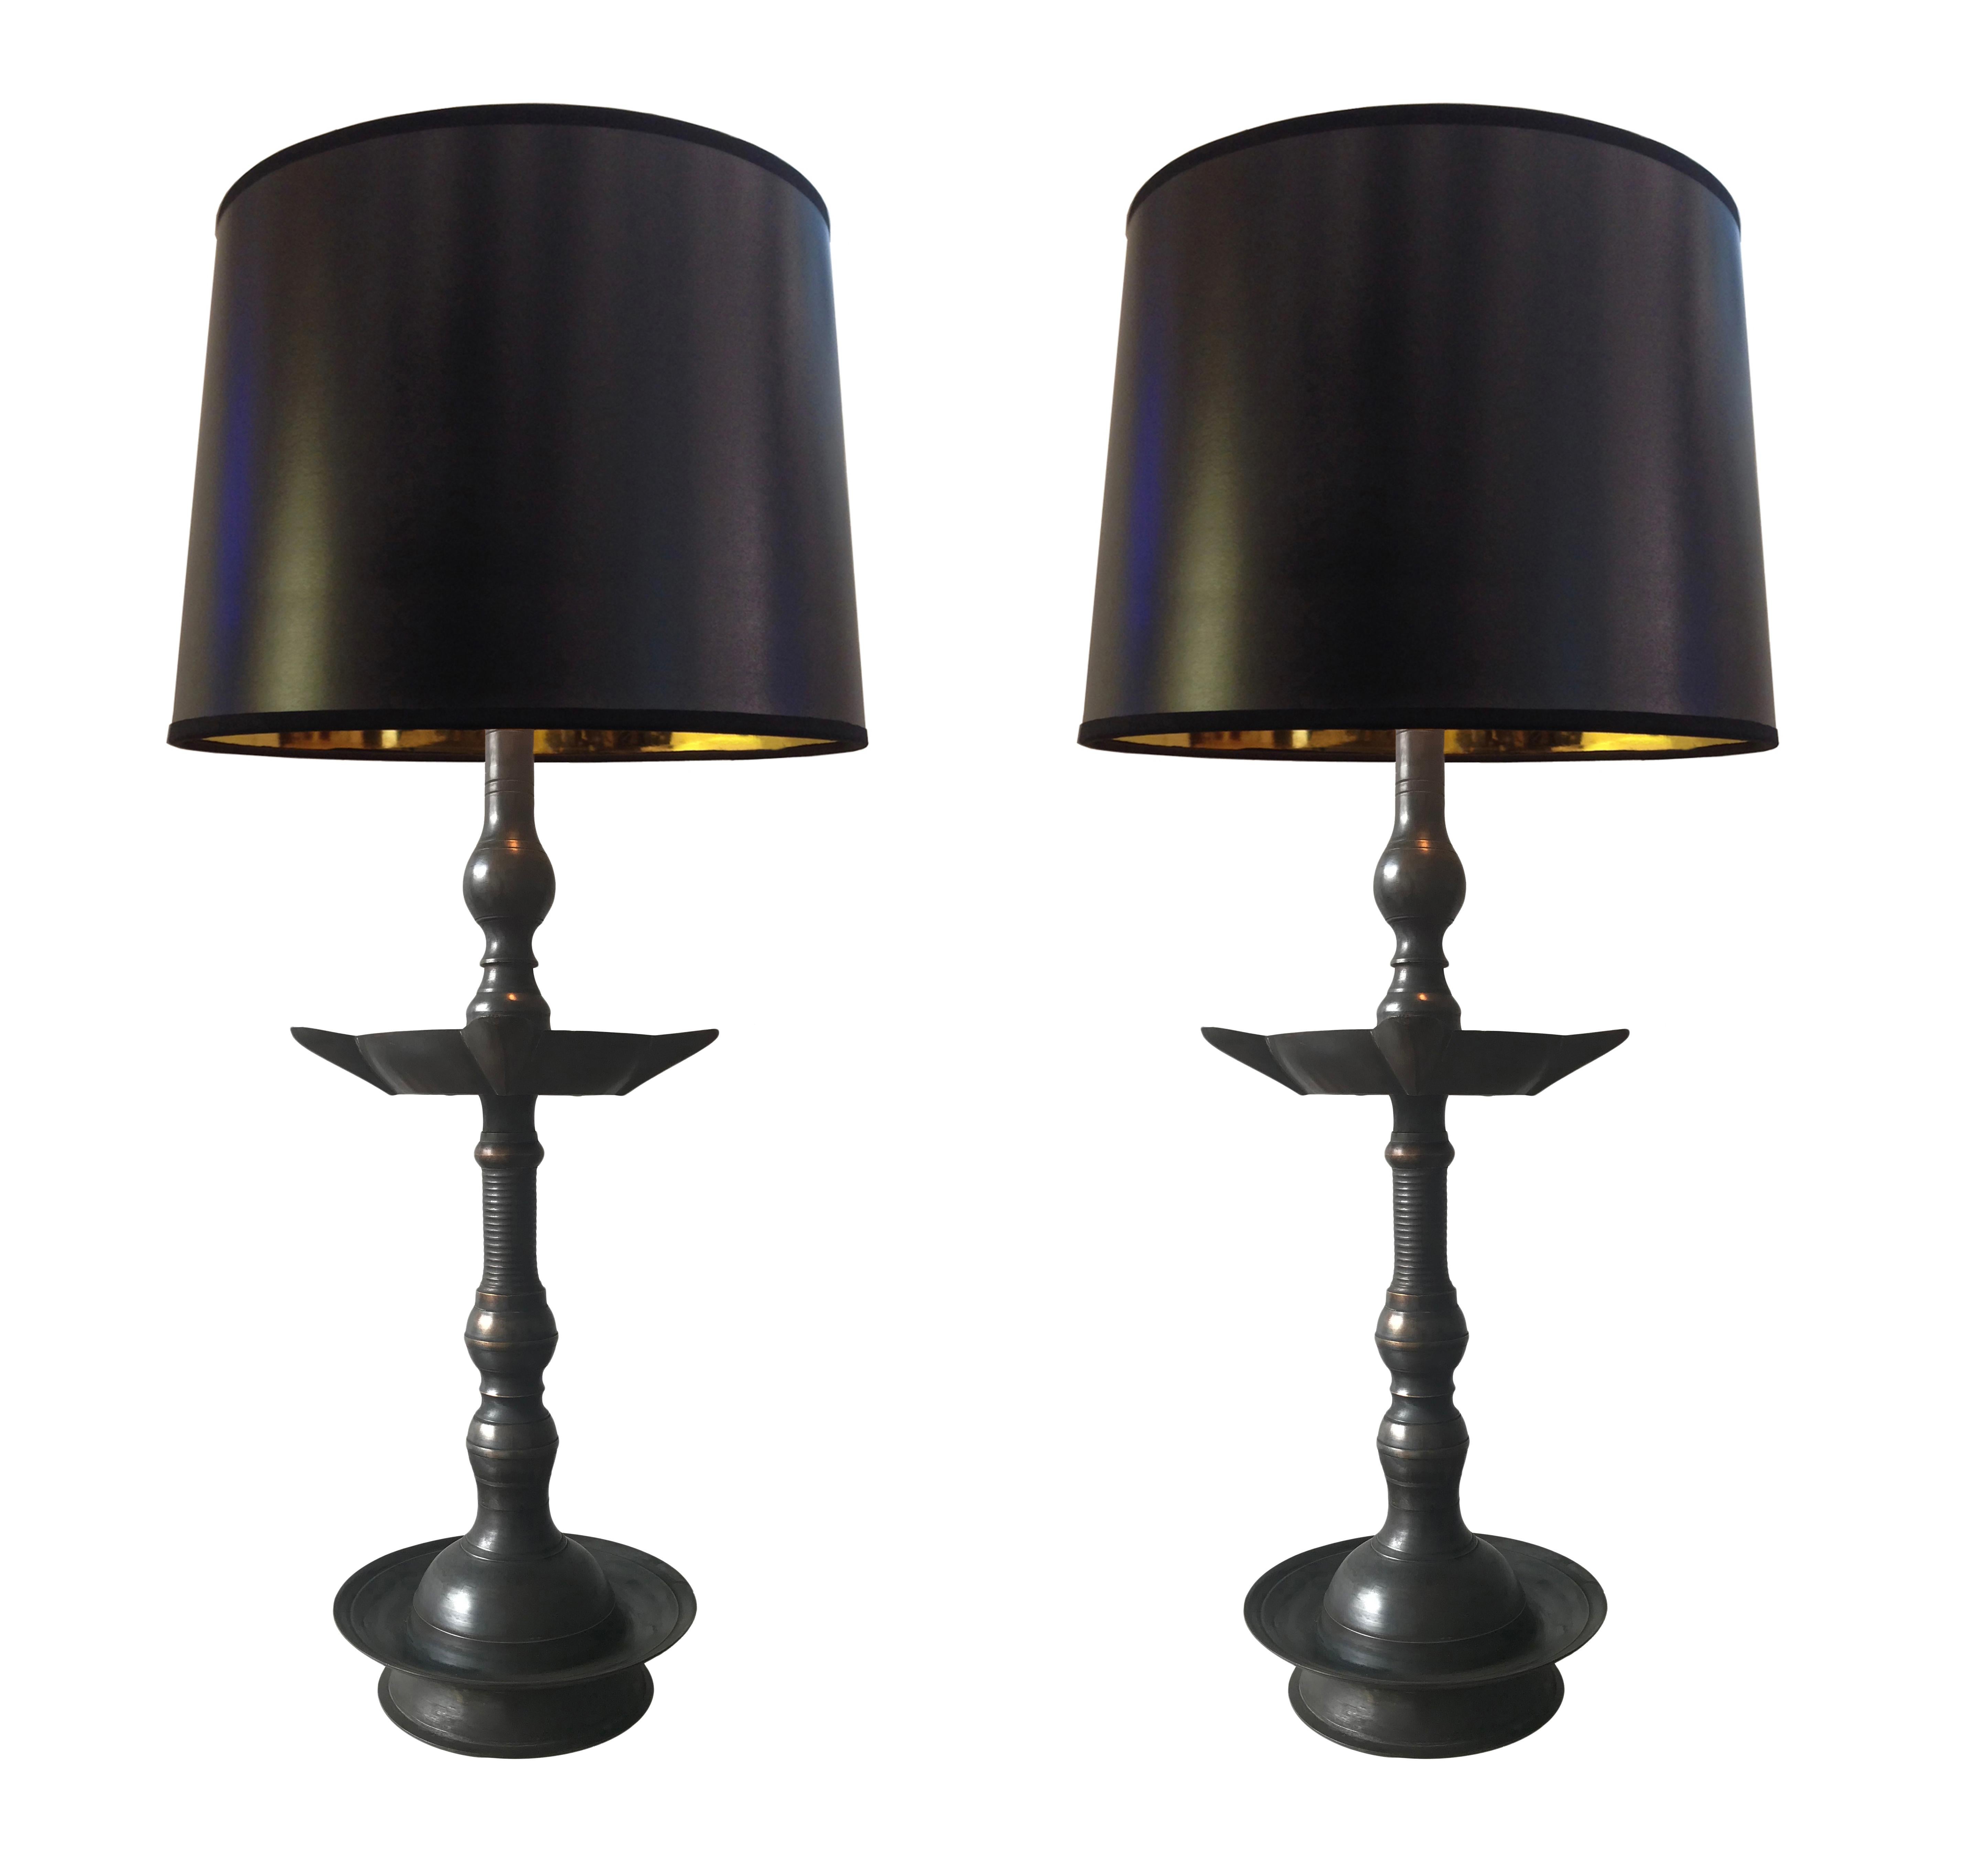 Two heavy brass Indian oil lamps. Electrified with switched E26 lightbulb holders and either, Euro-style shade-ring or harp fitting. 
The brass has been extensively aged over a period of time to produce the rich, dark finish with brassy highlights.